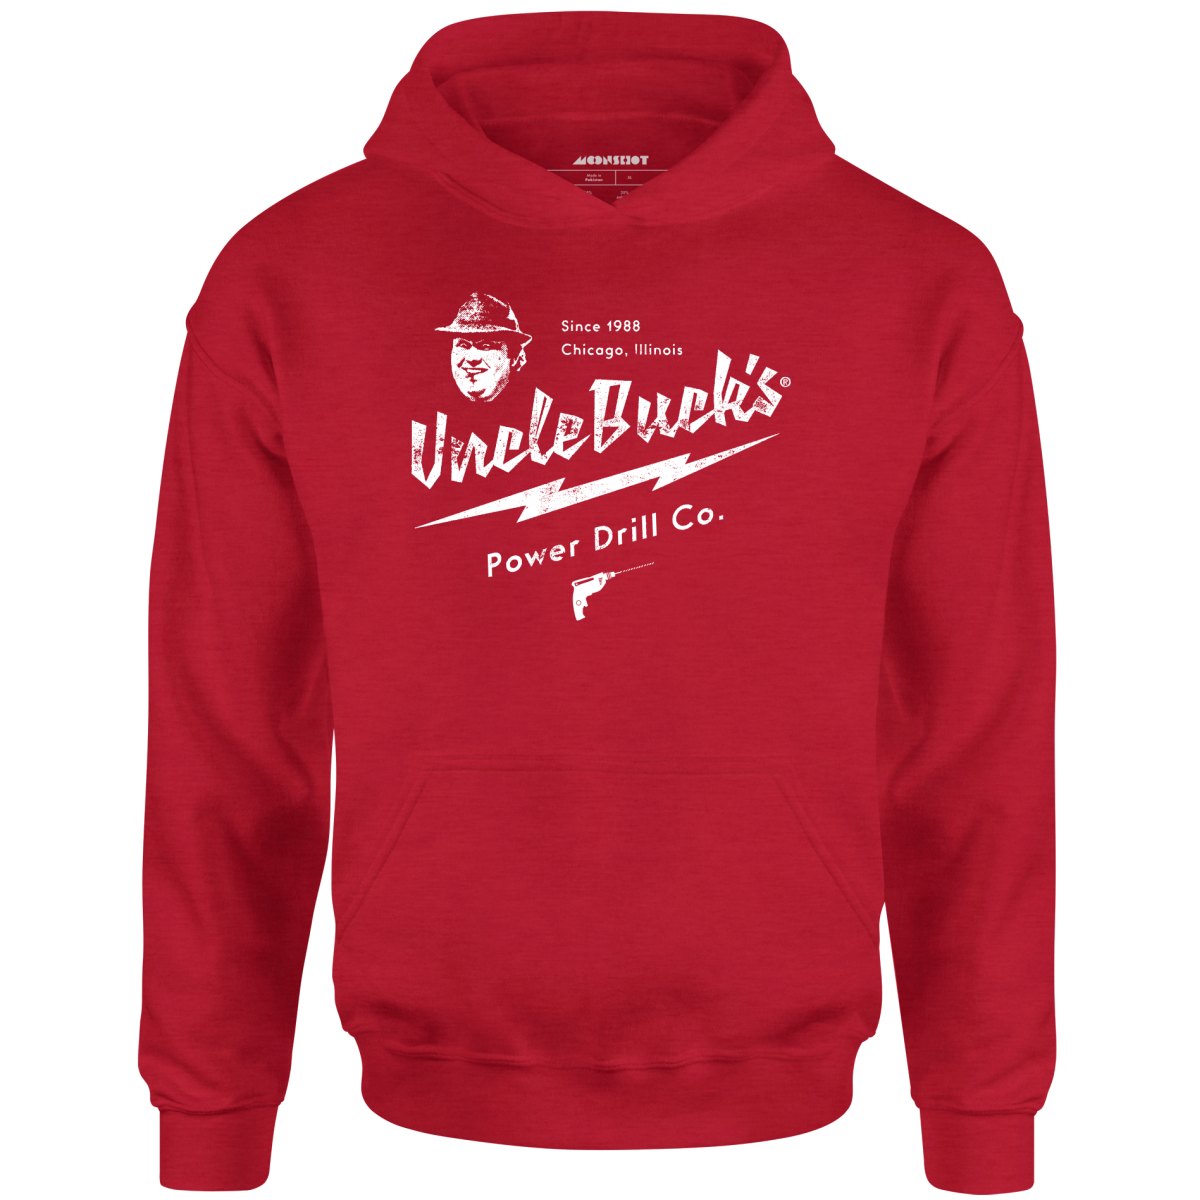 Uncle Buck's Power Drill Co. - Unisex Hoodie